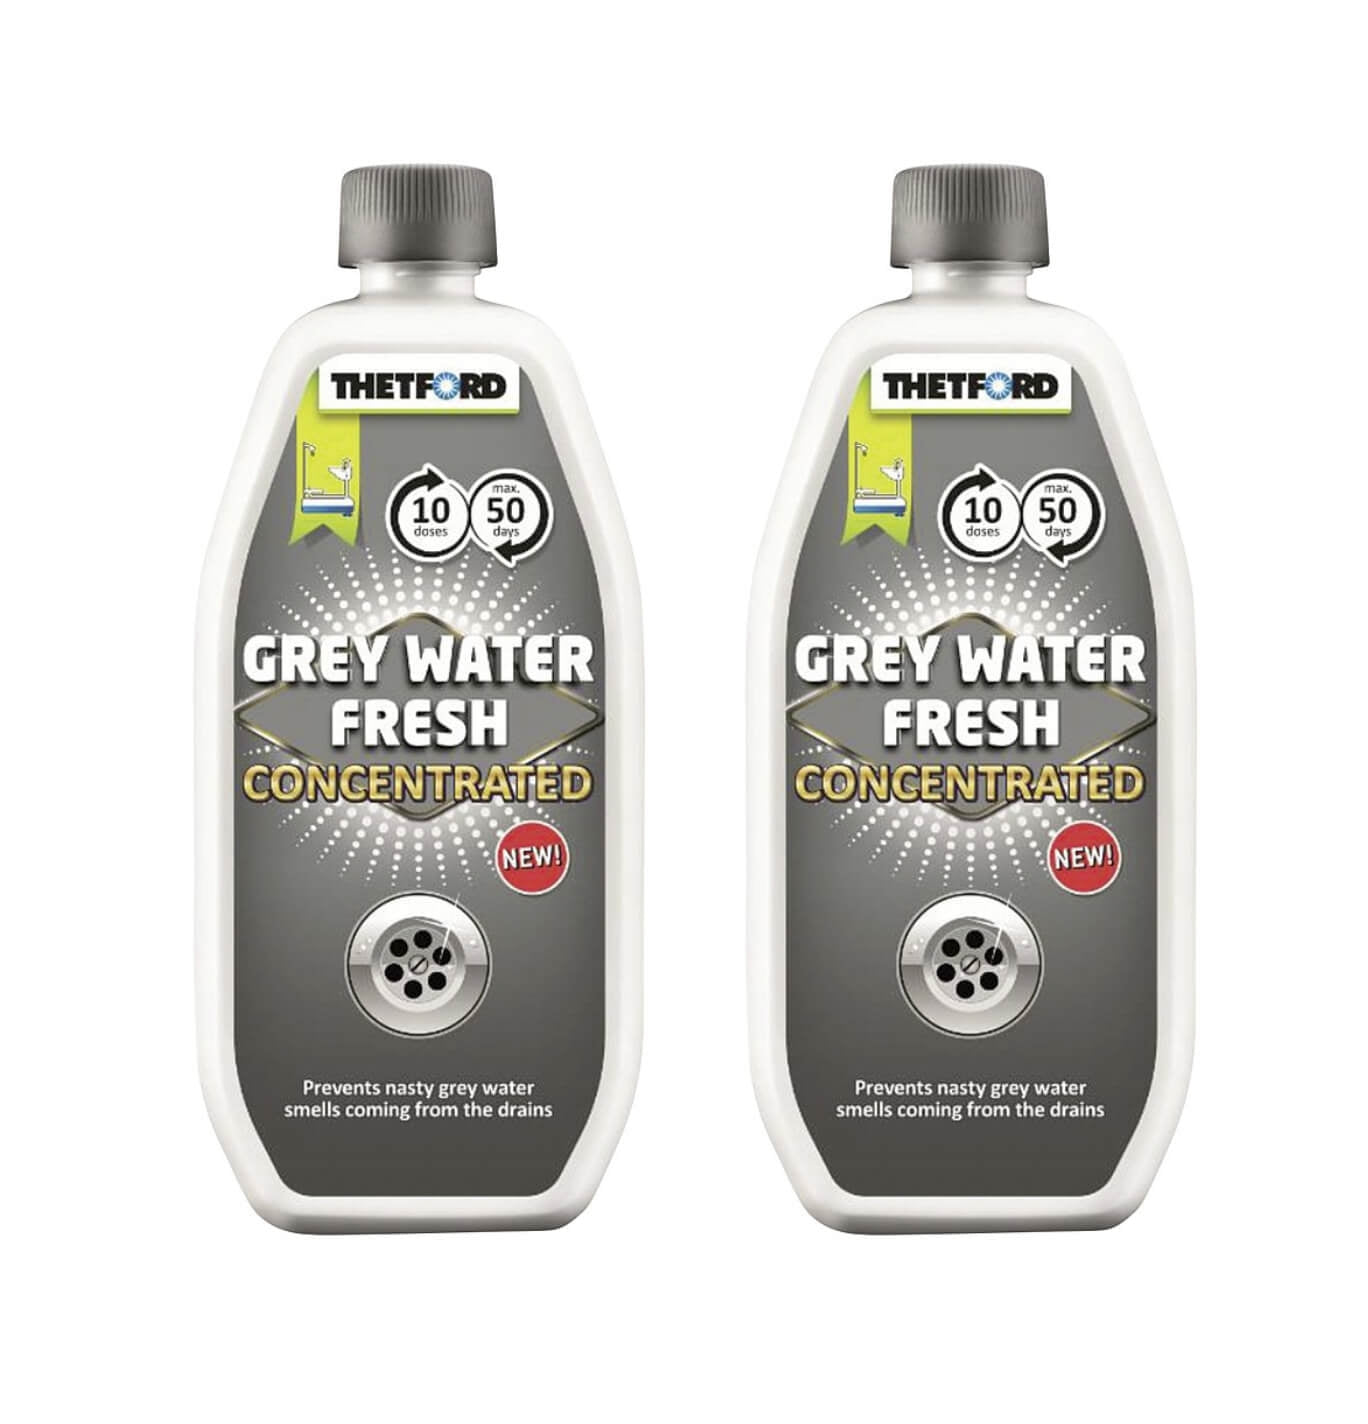 Thetford Grey Water Fresh Concentrated Odour Control | 2 Pack Image